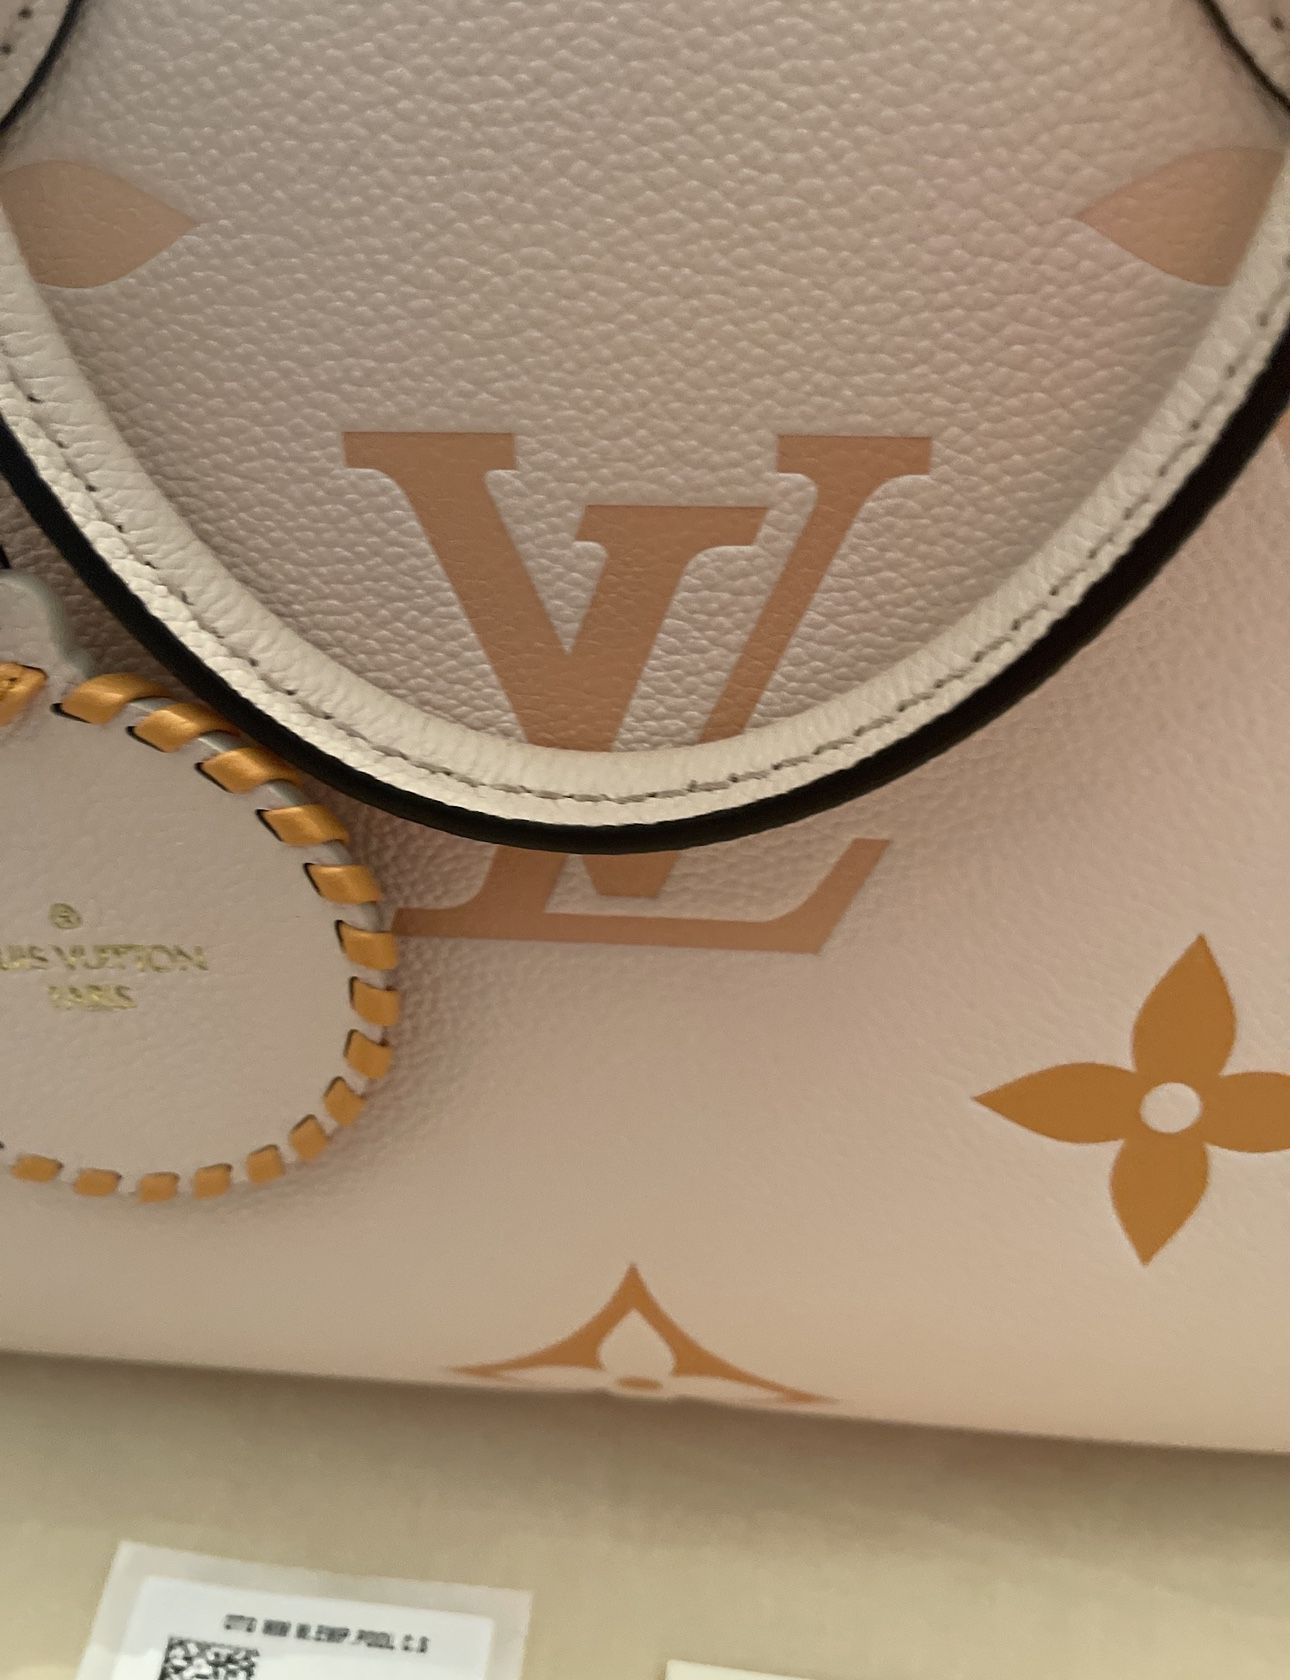 Louis Vuitton Retro Bag Limited Edition Murucami Cherry Blossom Monogram  for Sale in Henderson, NV - OfferUp